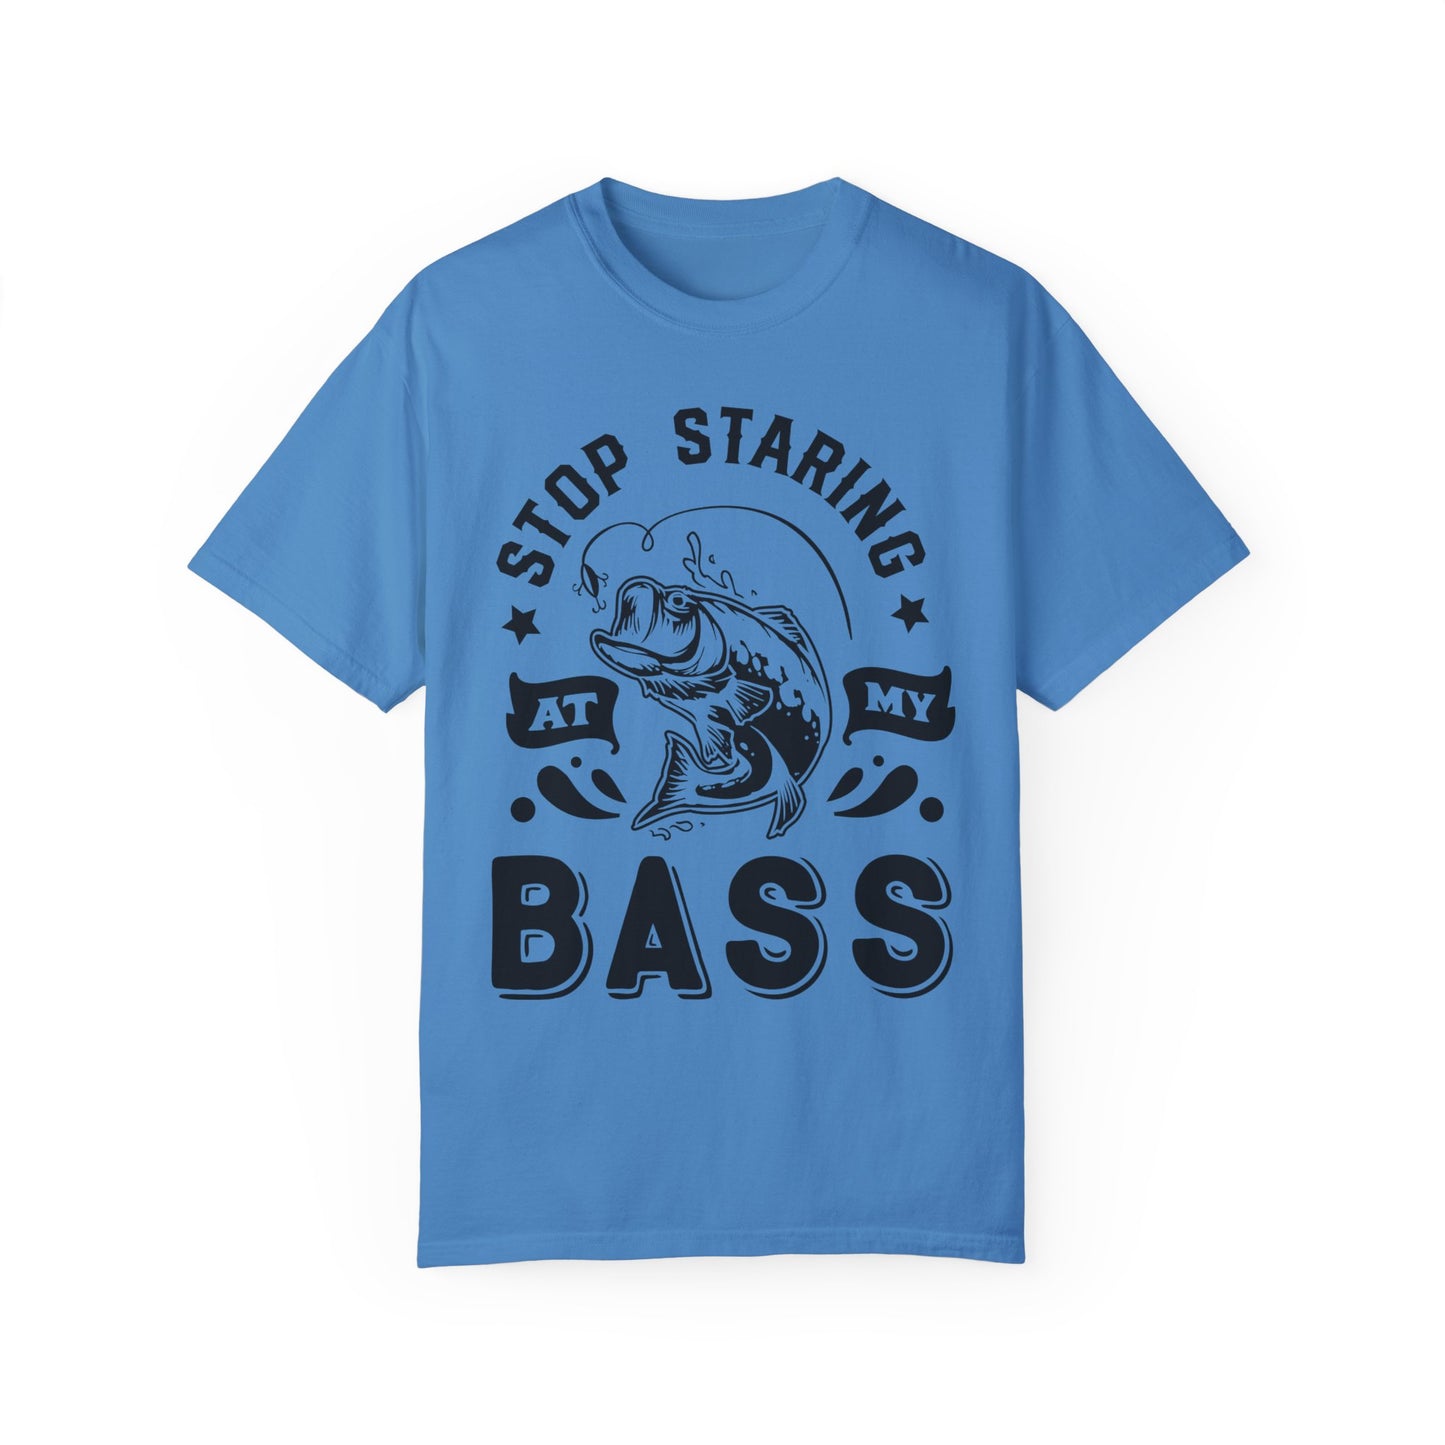 Stop Staring at my Bass: Unisex Garment-Dyed T-shirt